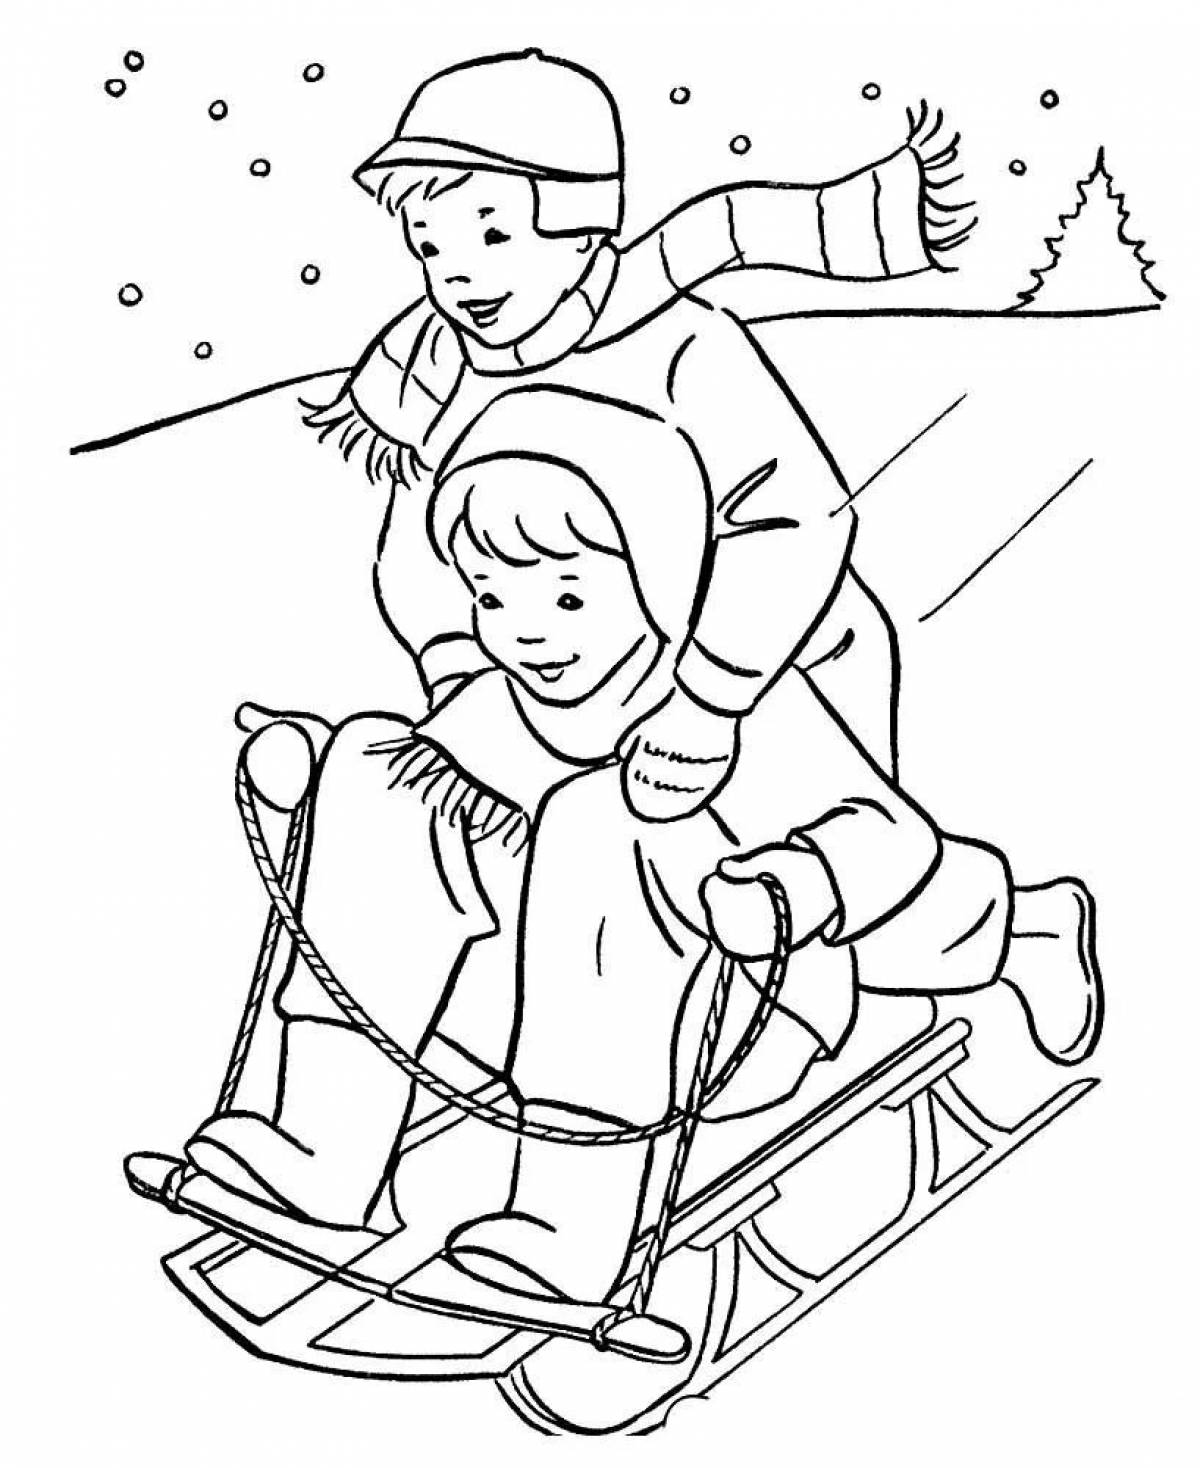 Colorful chuck and geek coloring page